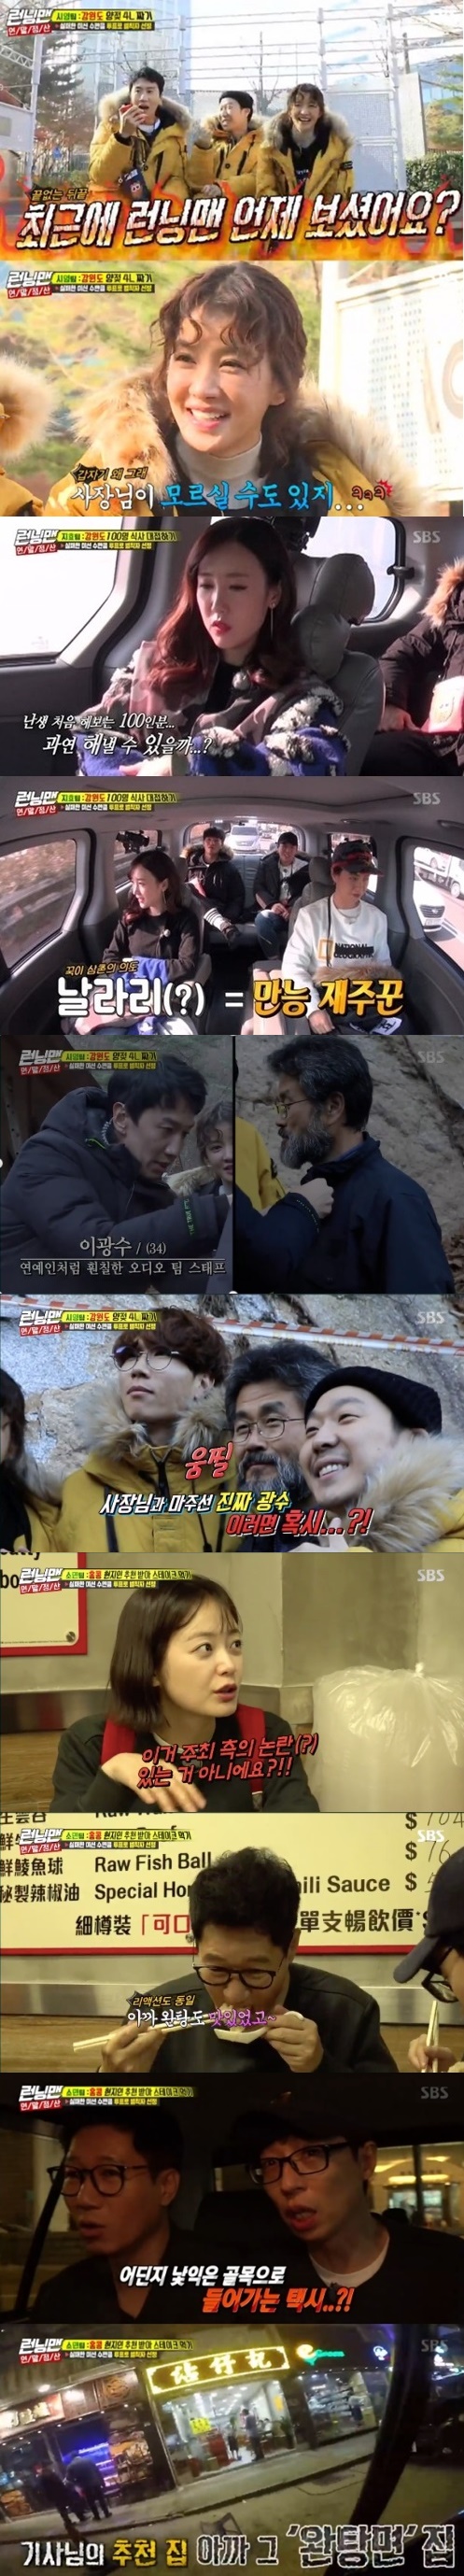 SBS Running Man rose to 9.9% of the highest audience rating per minute, showing an increase in ratings.According to Nielsen Korea, the ratings agency, Running Man, which aired on the 9th, rose to 5.5% in the first part of the audience rating and 8.7% in the second part (based on the audience rating of households in the Seoul metropolitan area), which was higher than last week, and the 2049 target audience rating, an important indicator of major advertising officials, jumped to 4.3%.The highest audience rating per minute was 9.9%.The show was featured in the feature of the year-end settlement of the mission: Loser Resurrection Race, which re-challenges the failed missions among the global missions that the members have been conducting, and actor Lee Si-young appeared as a guest.The members were teamed up with Lee Si-young, Jeon So-min and Song Ji-hyo, respectively, and were divided into Hong Kong 1 team, Gangwon Province and South Korea 2 team.In the event of a mission failure, the number of failed members was selected and punished.With Lee Si-young and Song Ji-hyo teams deciding on the Gangwon Province, South Korea, among the three teams, Lee Si-youngs team had to weave 4L of milk on the ranch related to the king.Lee Kwang-soo, who first took the voting rights and tested his awareness, did not recognize the rancher and tasted the humiliation of losing the voting rights to Haha and Lee Si-young.To make matters worse, Lee Si-youngs team predicted a tough mission as the flocks kept running away in fear.The Song Ji-hyo team challenged the 100 people to cook mission.While the singer star was invited as a surprise guest and cooked with Song Ji-hyo, Kim Jong-kook and Yang Se-chan also tested the awareness of the short-term, but only Kim Jong-kook laughed.The Jeon So-min team confirmed the bad lucks run to Hong Kong.I had to eat steak restaurants for local people, and if I was recommended for food, not steak, I had to eat it and re-challenge it.However, the food recommended by the taxi driver and the 73-year-old grandmother was a complete noodle, and the members were surprised by the fate of Okinawa.The scene rose to a maximum of 9.9% per minute, taking the best one minute.SBS screen capture